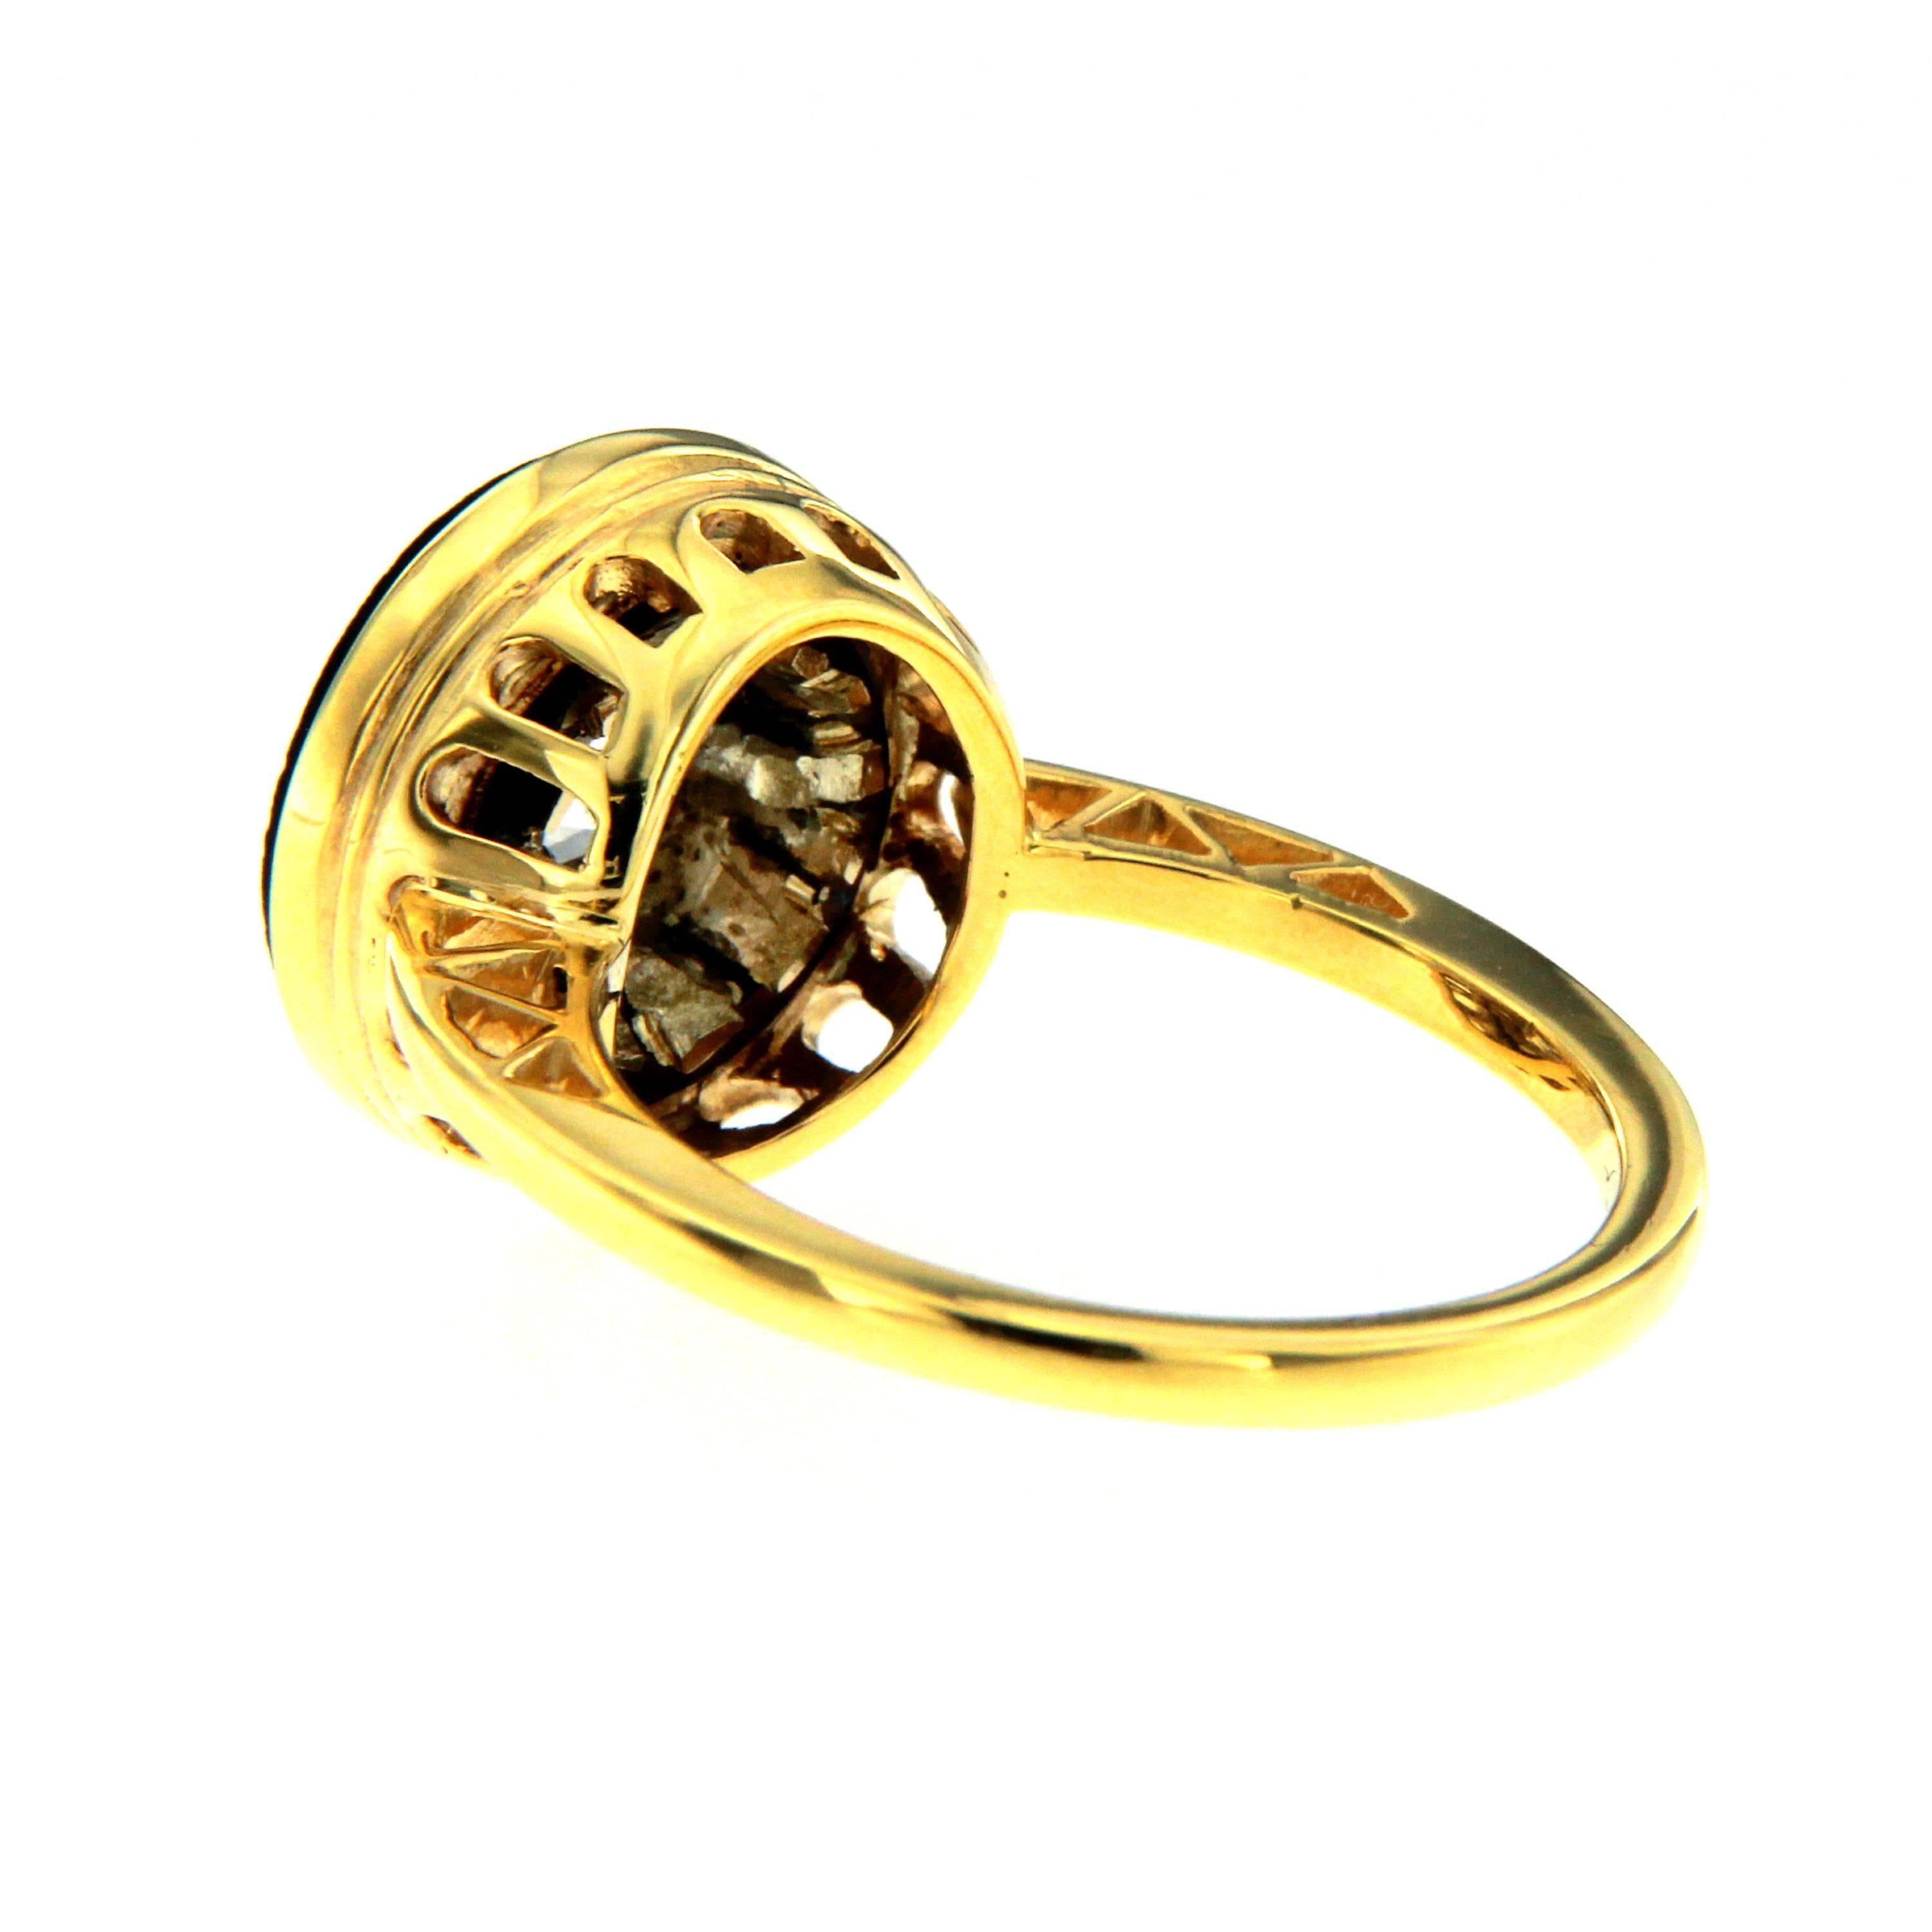 1950 Italian Diamond 1.51 Carat Solitaire Onyx Gold Ring In Excellent Condition In Napoli, Italy